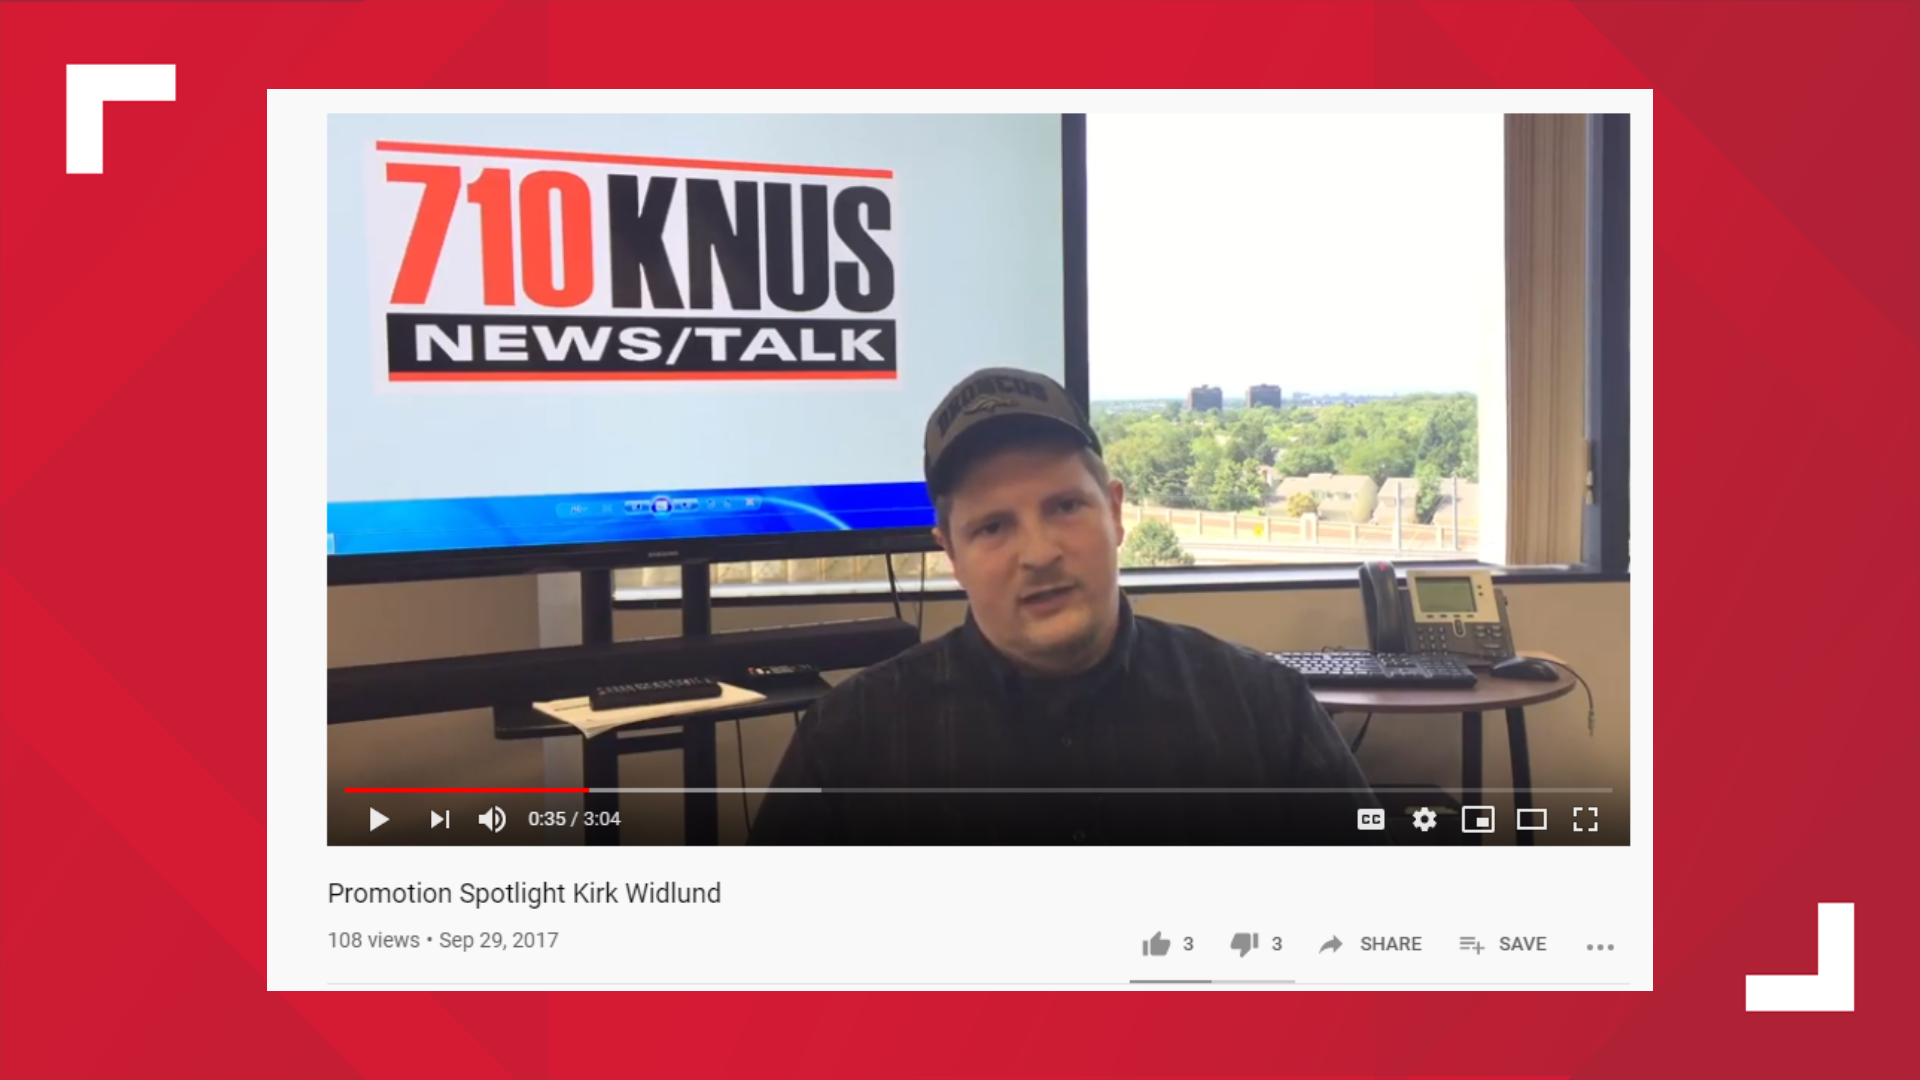 710KNUS producer Kirk Widlund denied any connection to neo-Nazi social media posts that have been attributed to him.